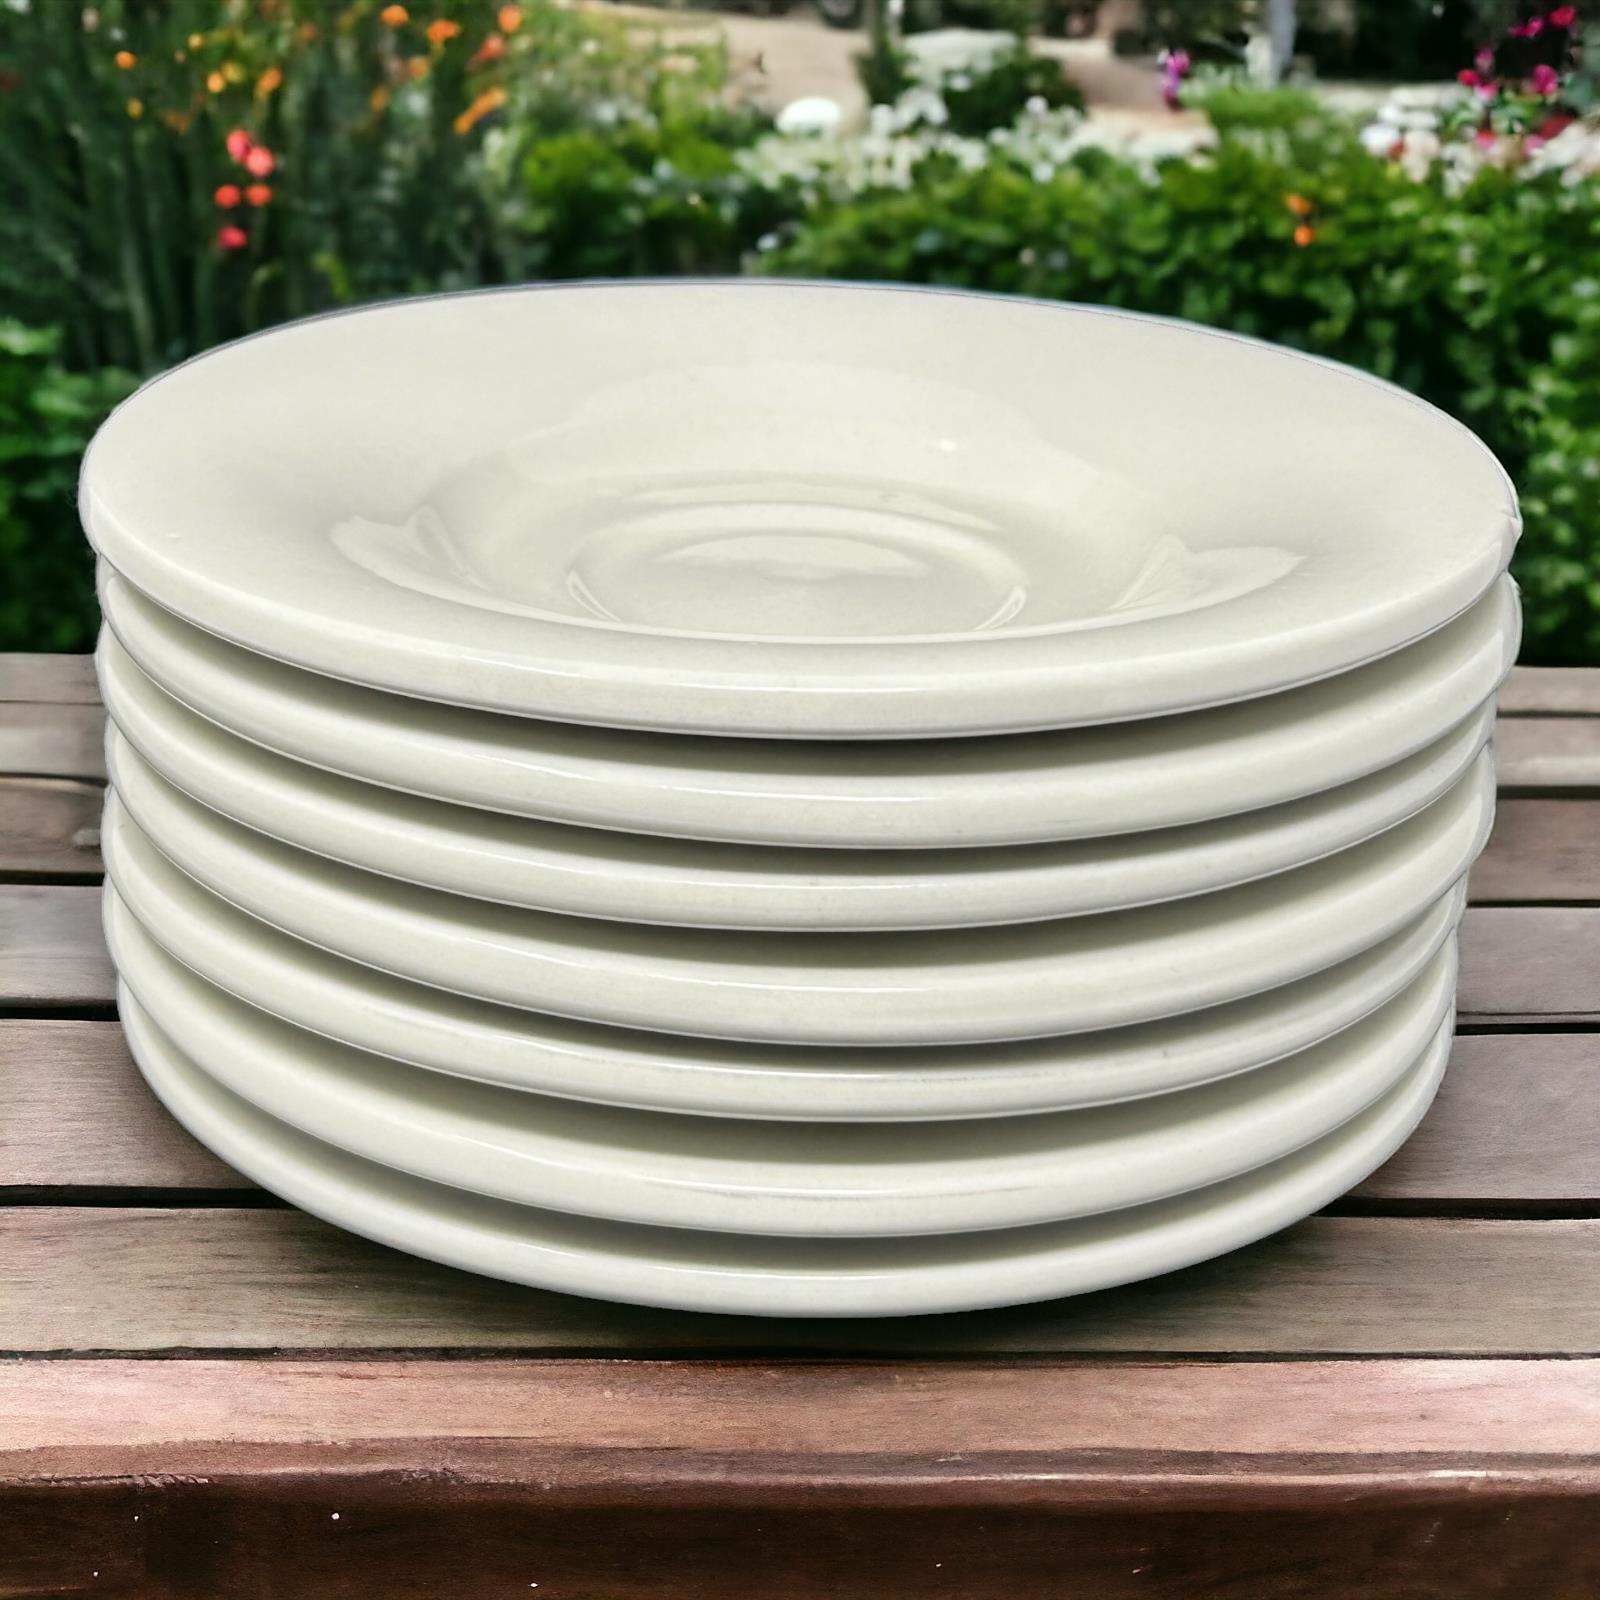 Pottery Barn Saucer Plates Set of 7 Oven Microwave Safe Heavy Restaurant Quality